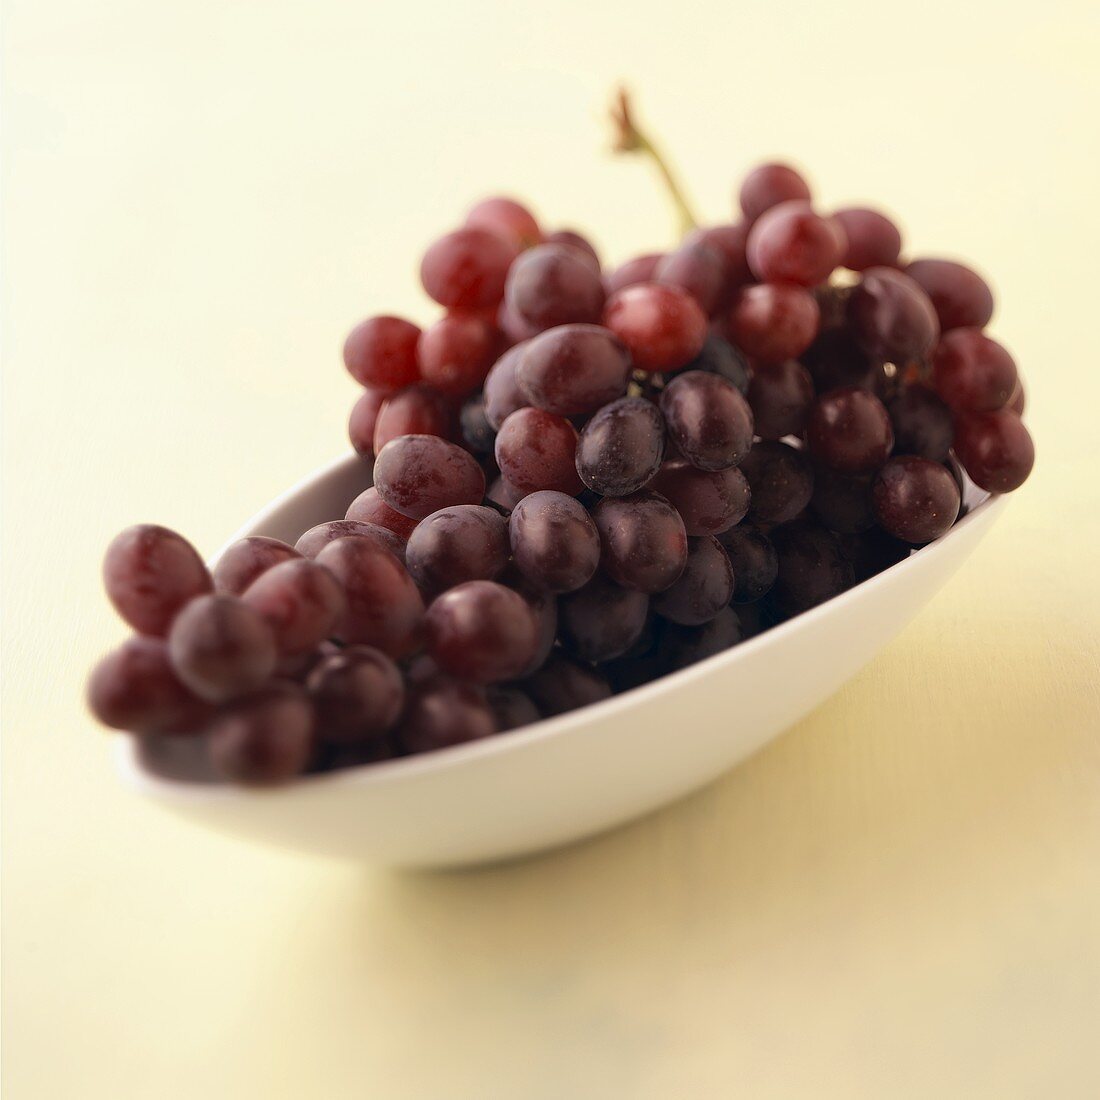 Red grapes in white bowl